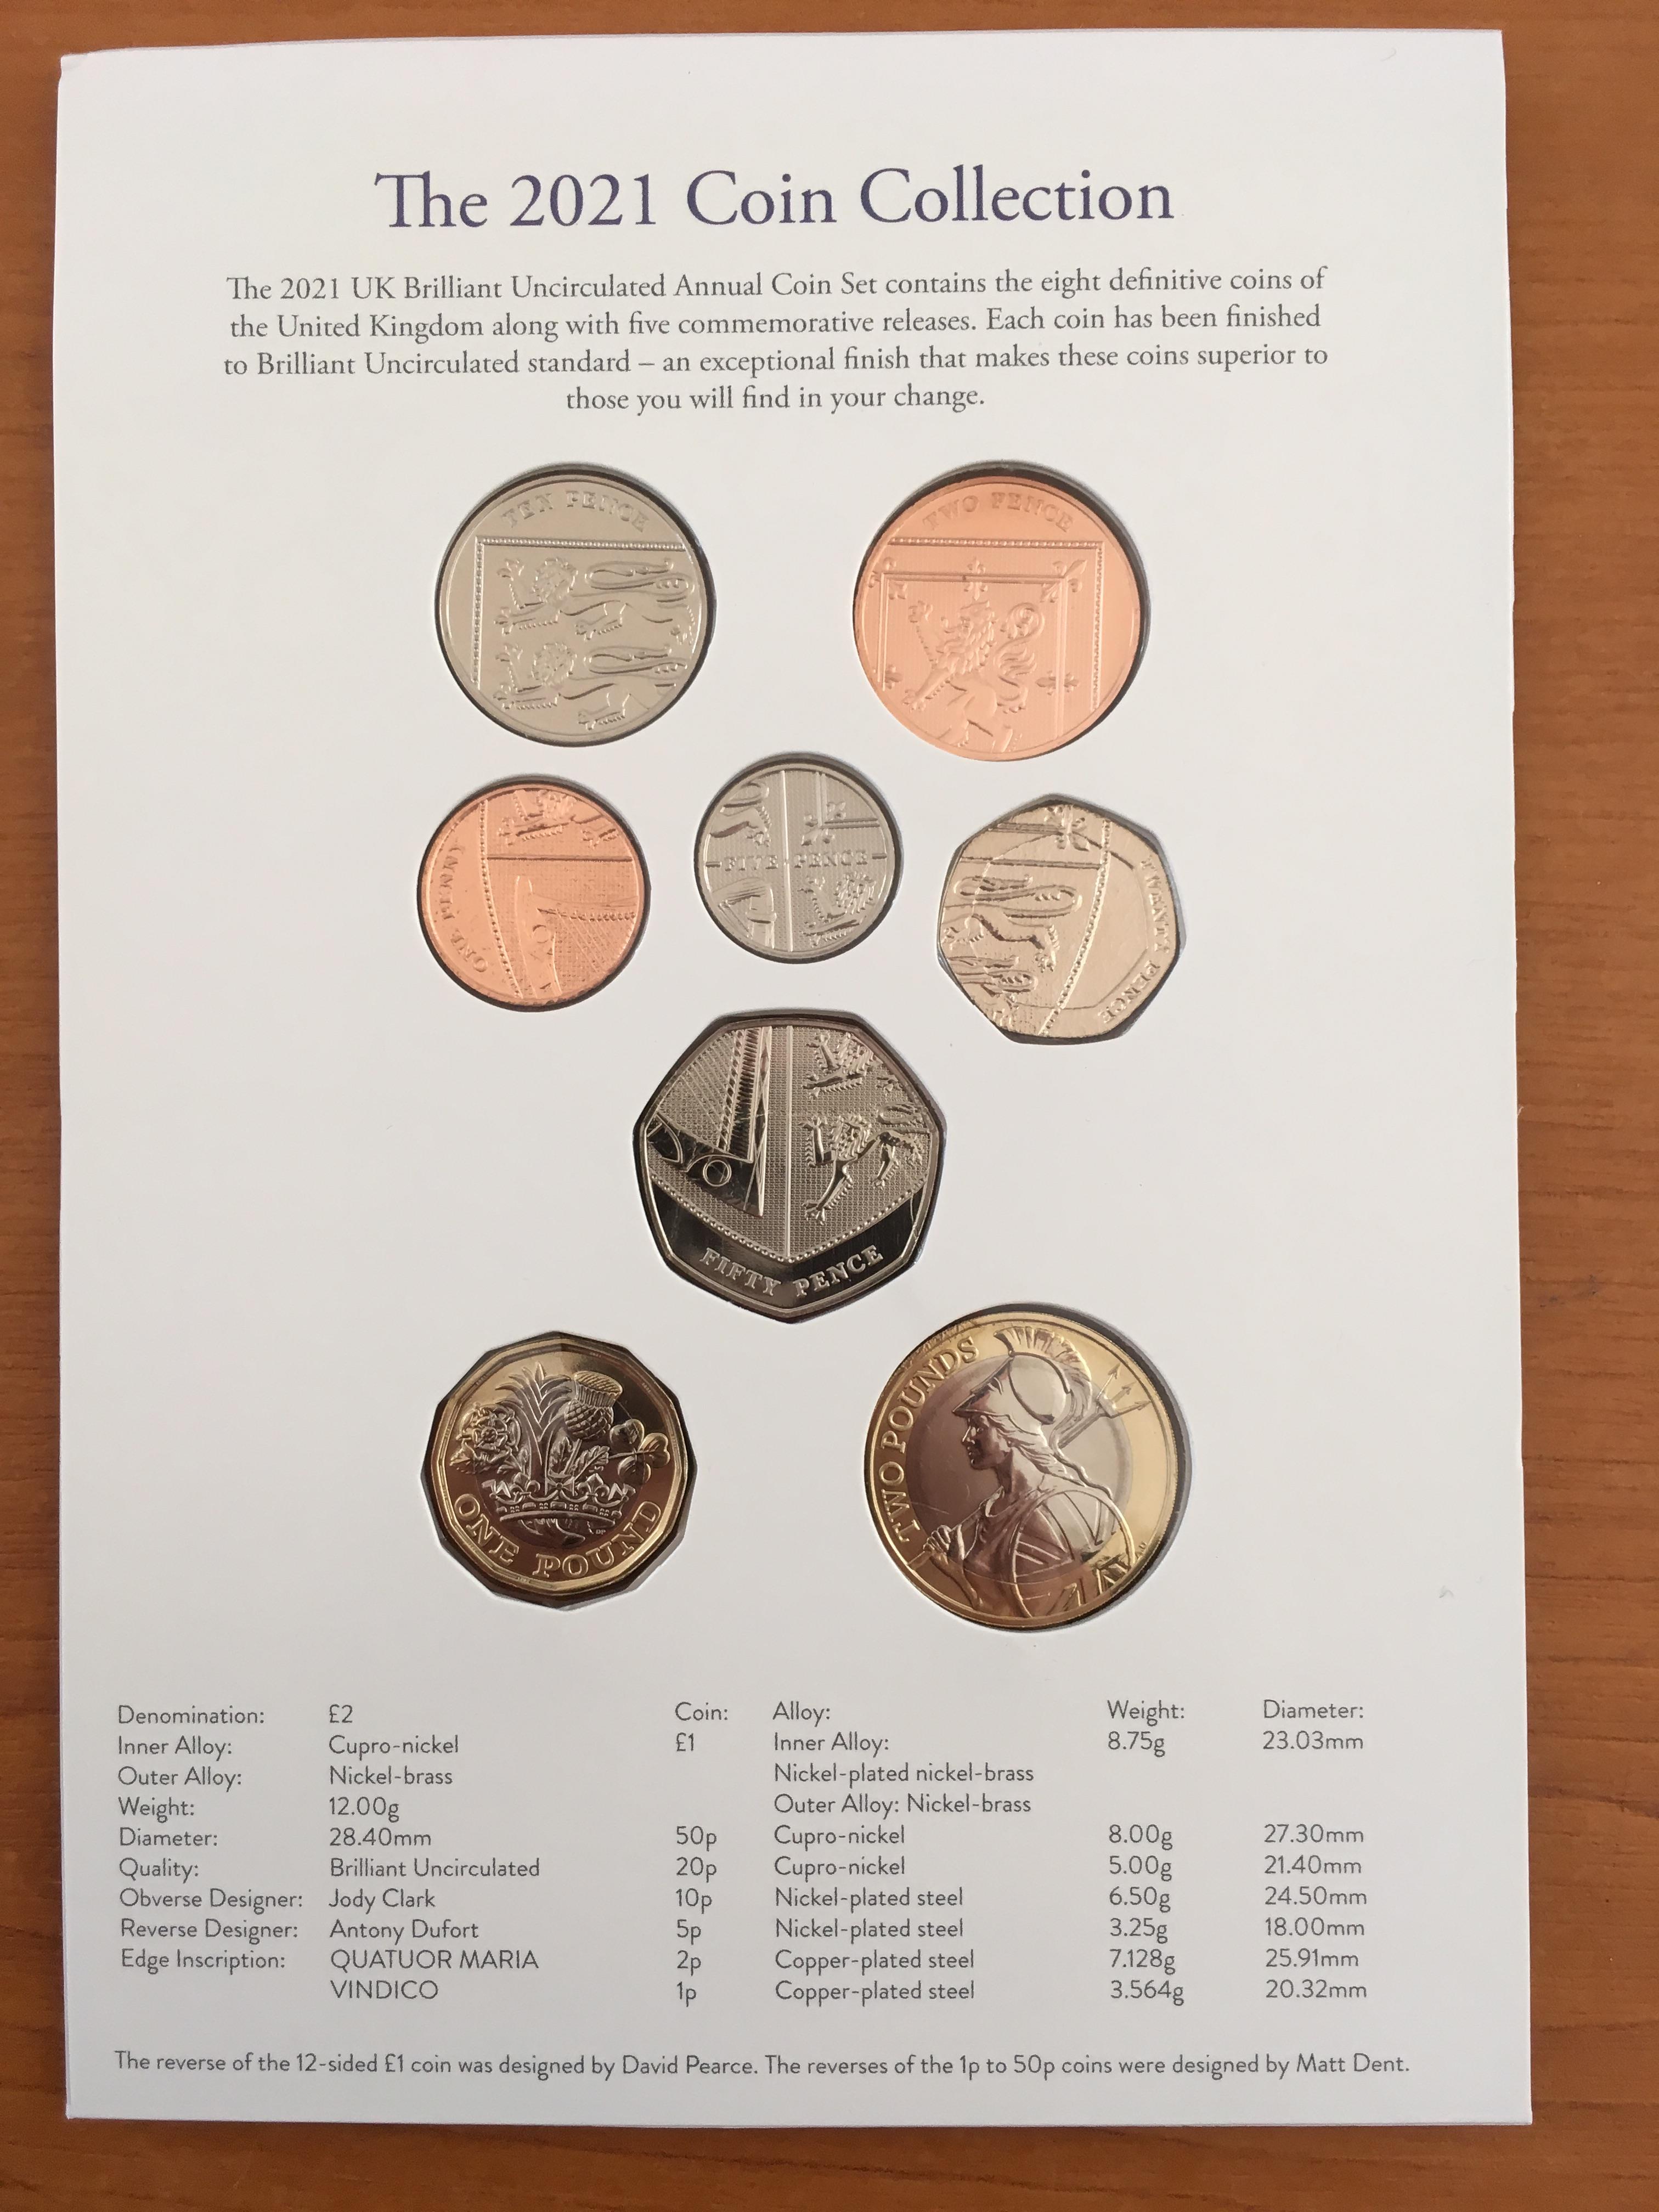 COINS: ROYAL MINT 2021 UNCIRCULATED DEFINITIVE COIN SET PLUS FURTHER CARD WITH THE SAME COINS, - Image 2 of 8